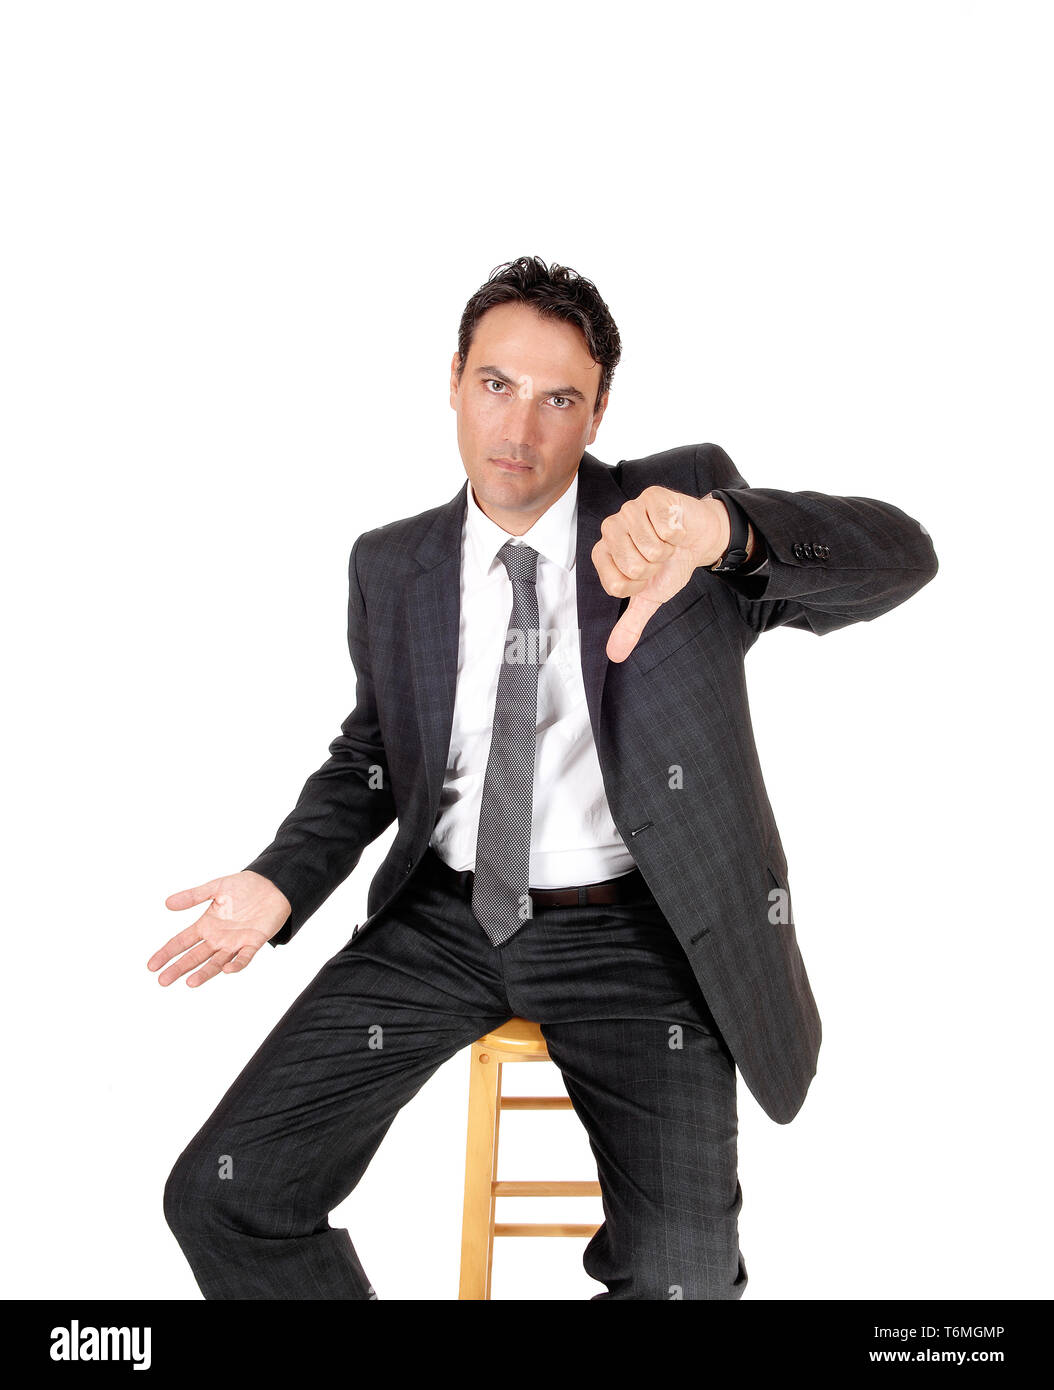 Serious looking man pointing thump down Stock Photo